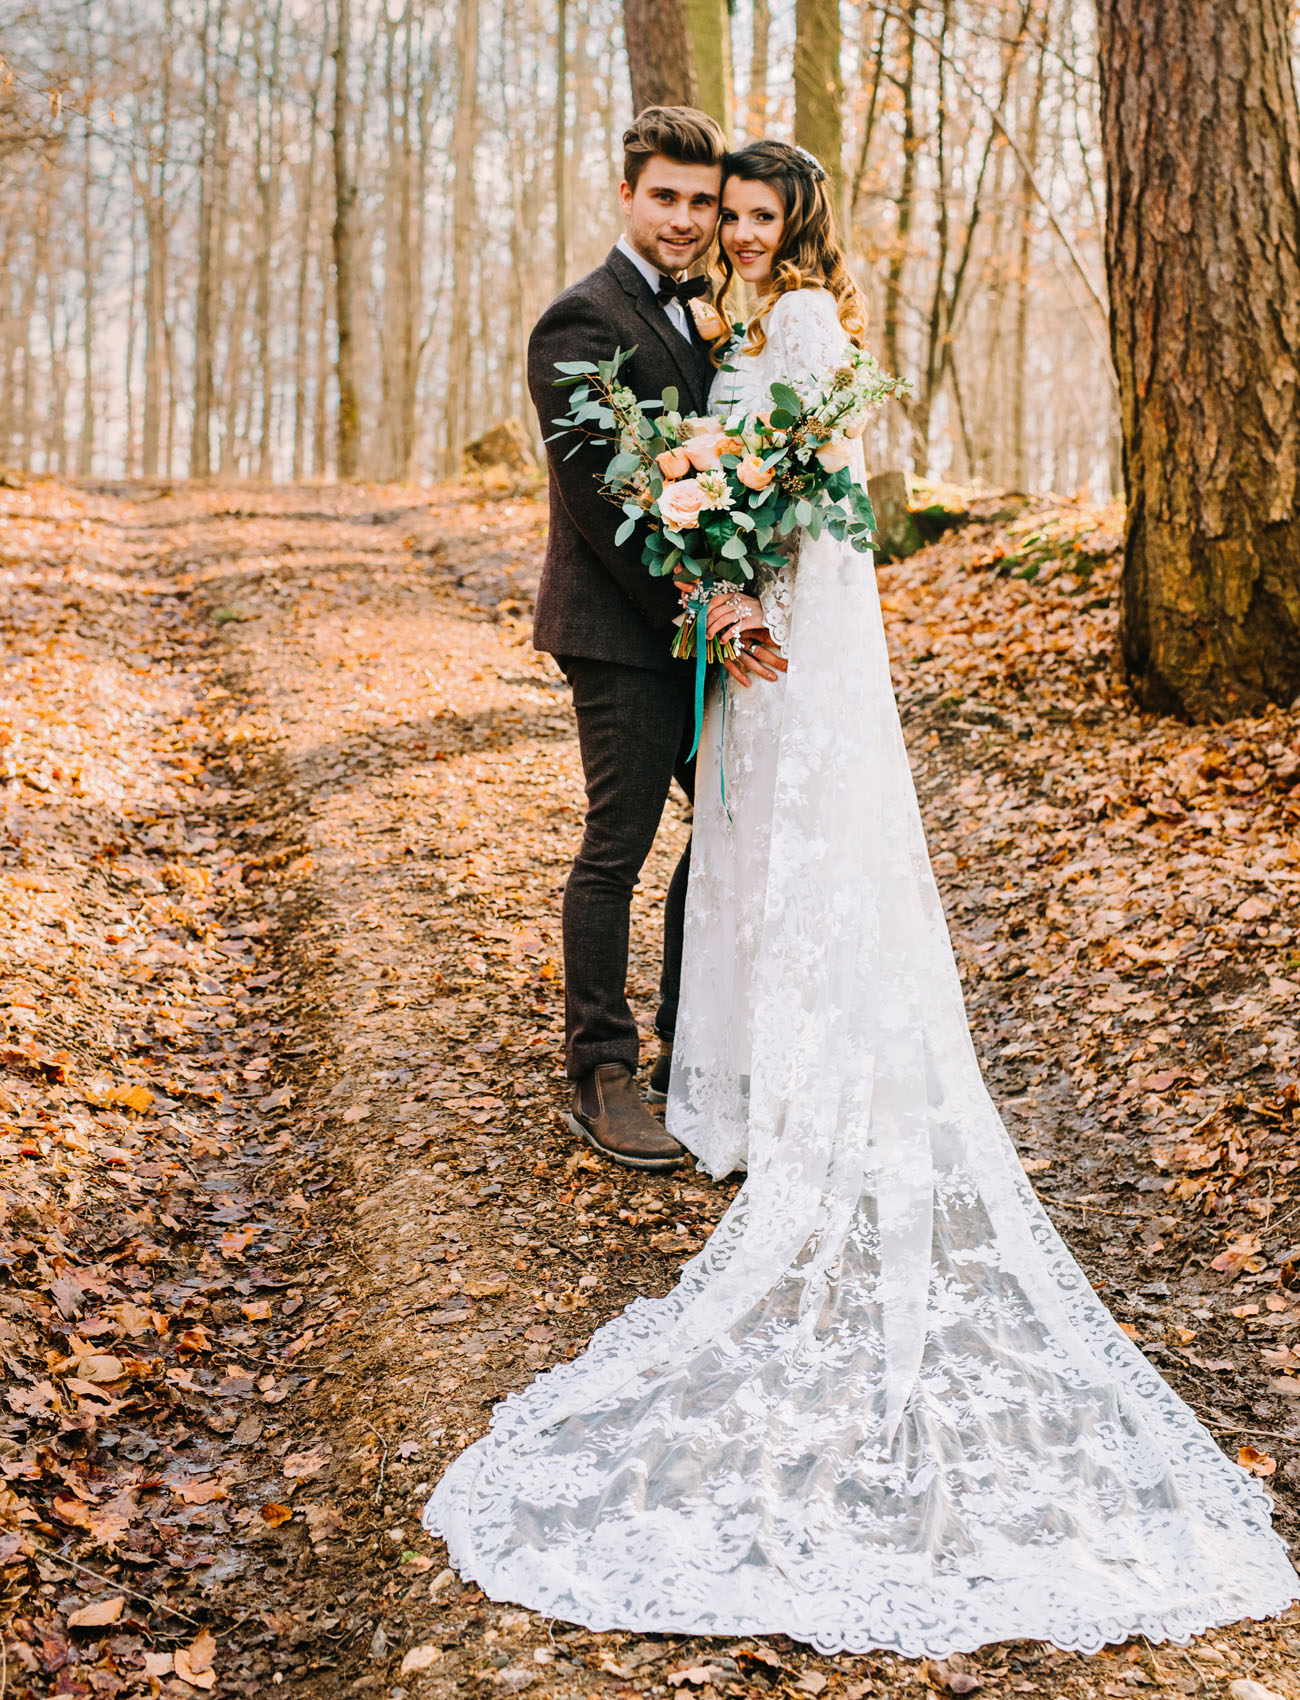 The bride was wearing a lace sheath wedding dress with a cape and a half updo, the groom was wearing a brown tweed three piece suit with a bow tie and brown shoes